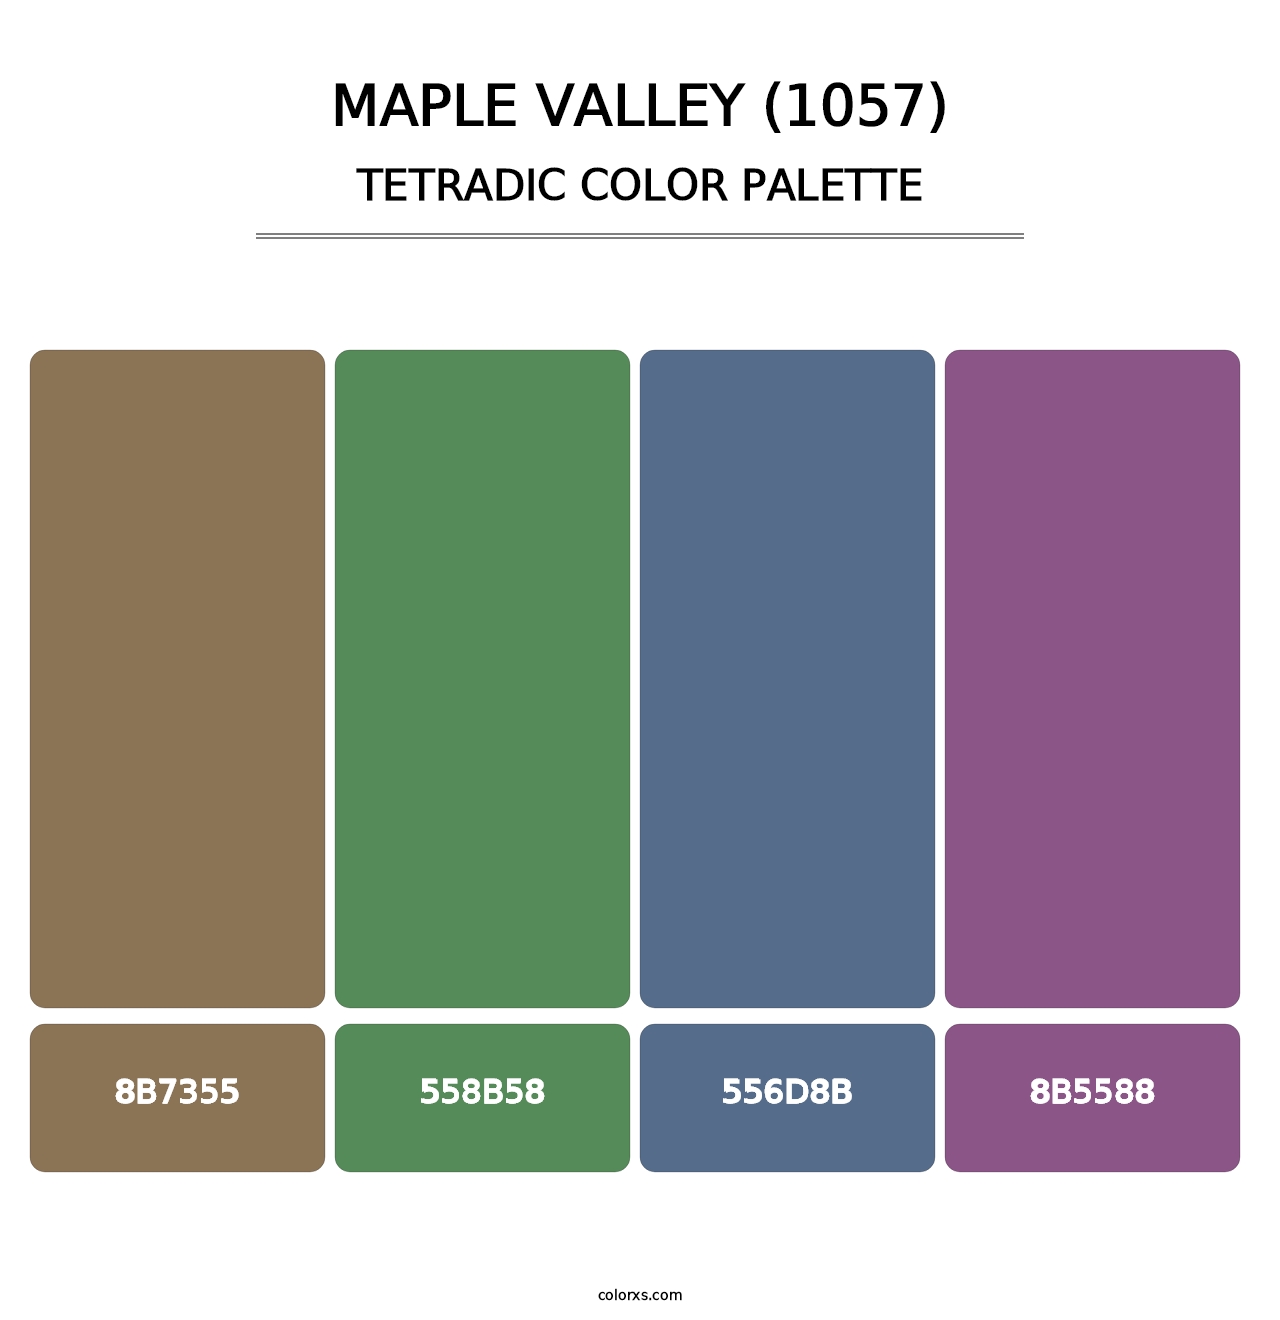 Maple Valley (1057) - Tetradic Color Palette